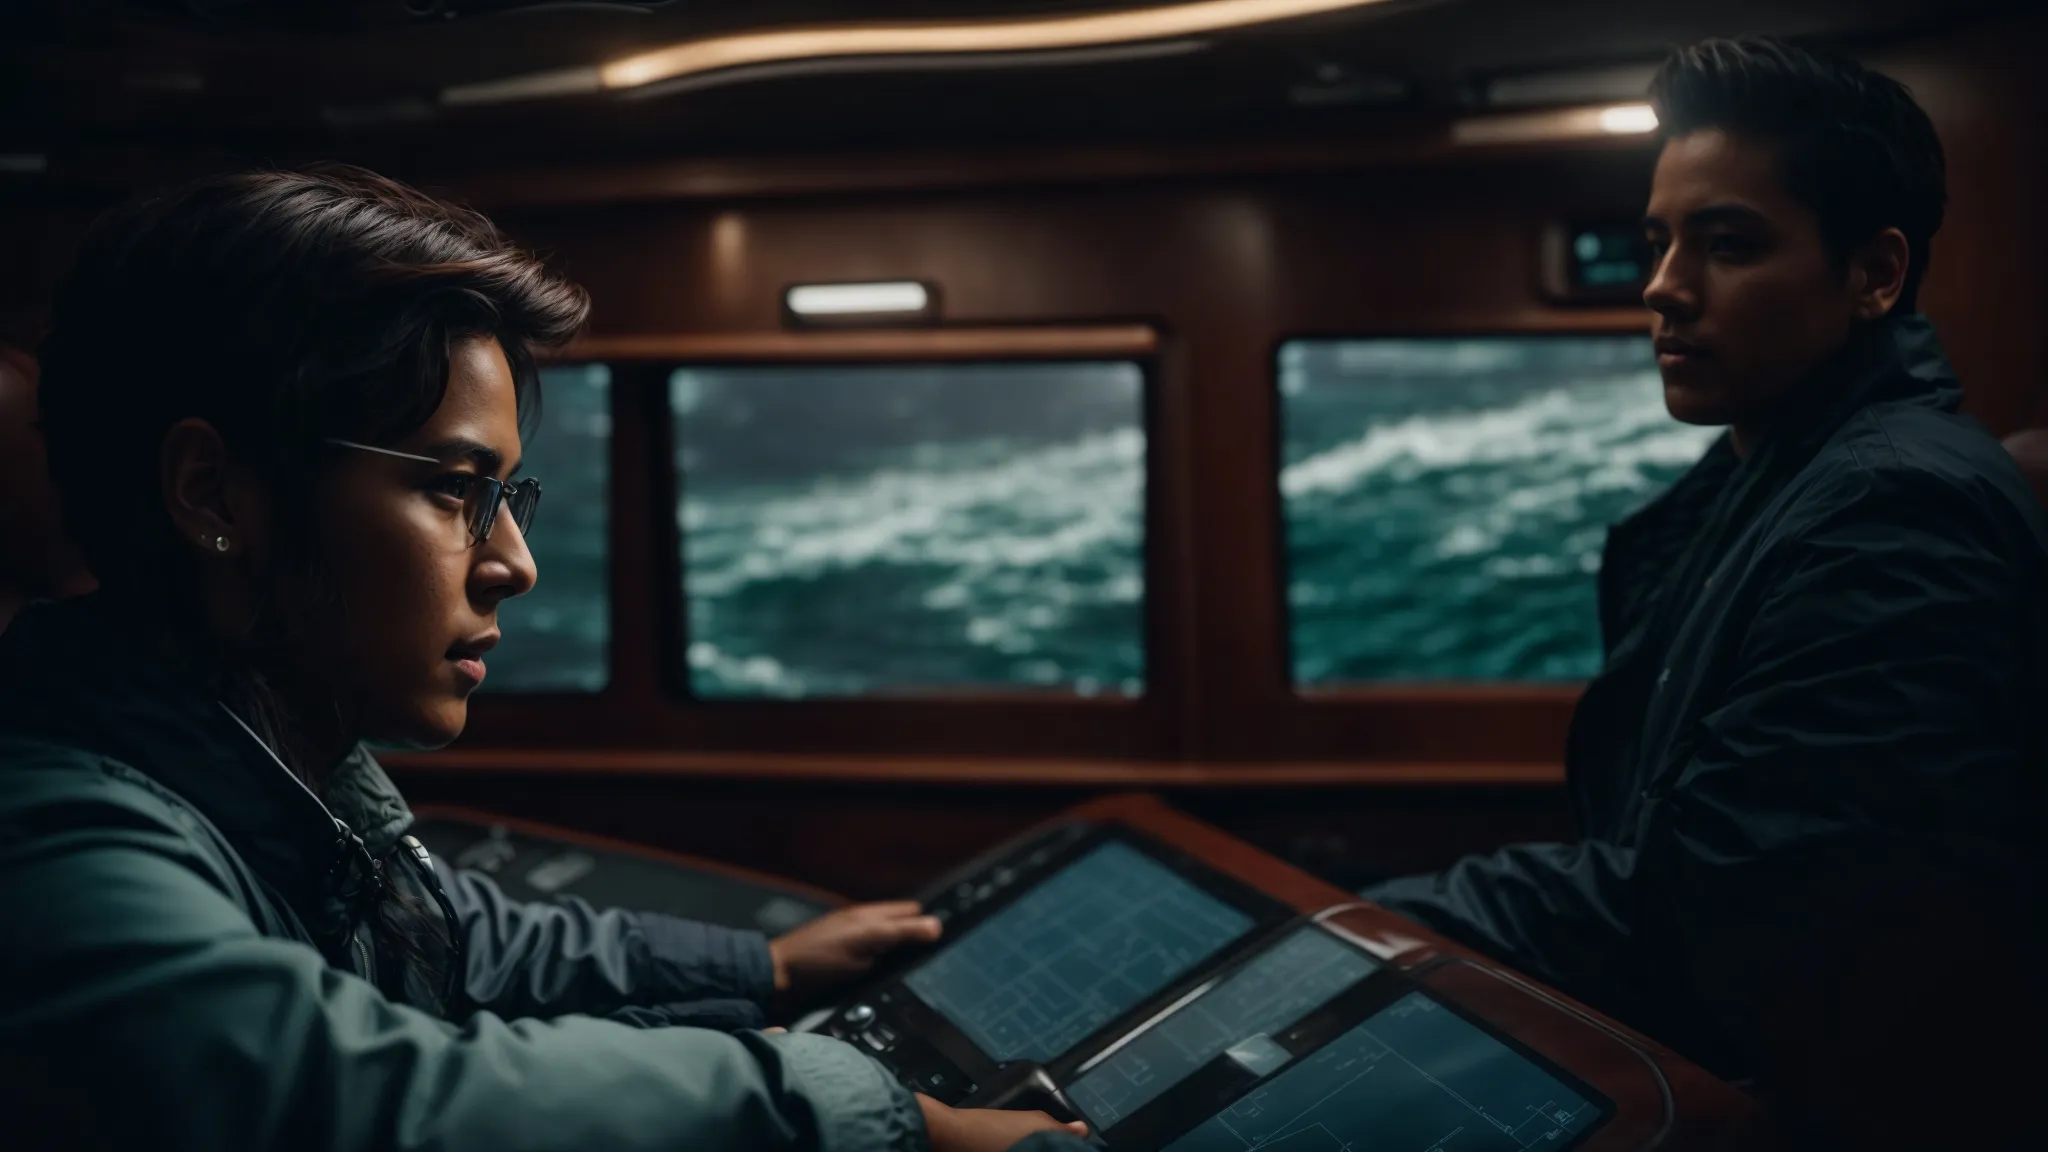 a determined navigator steering a ship through stormy digital waters, focused on a glowing map display.